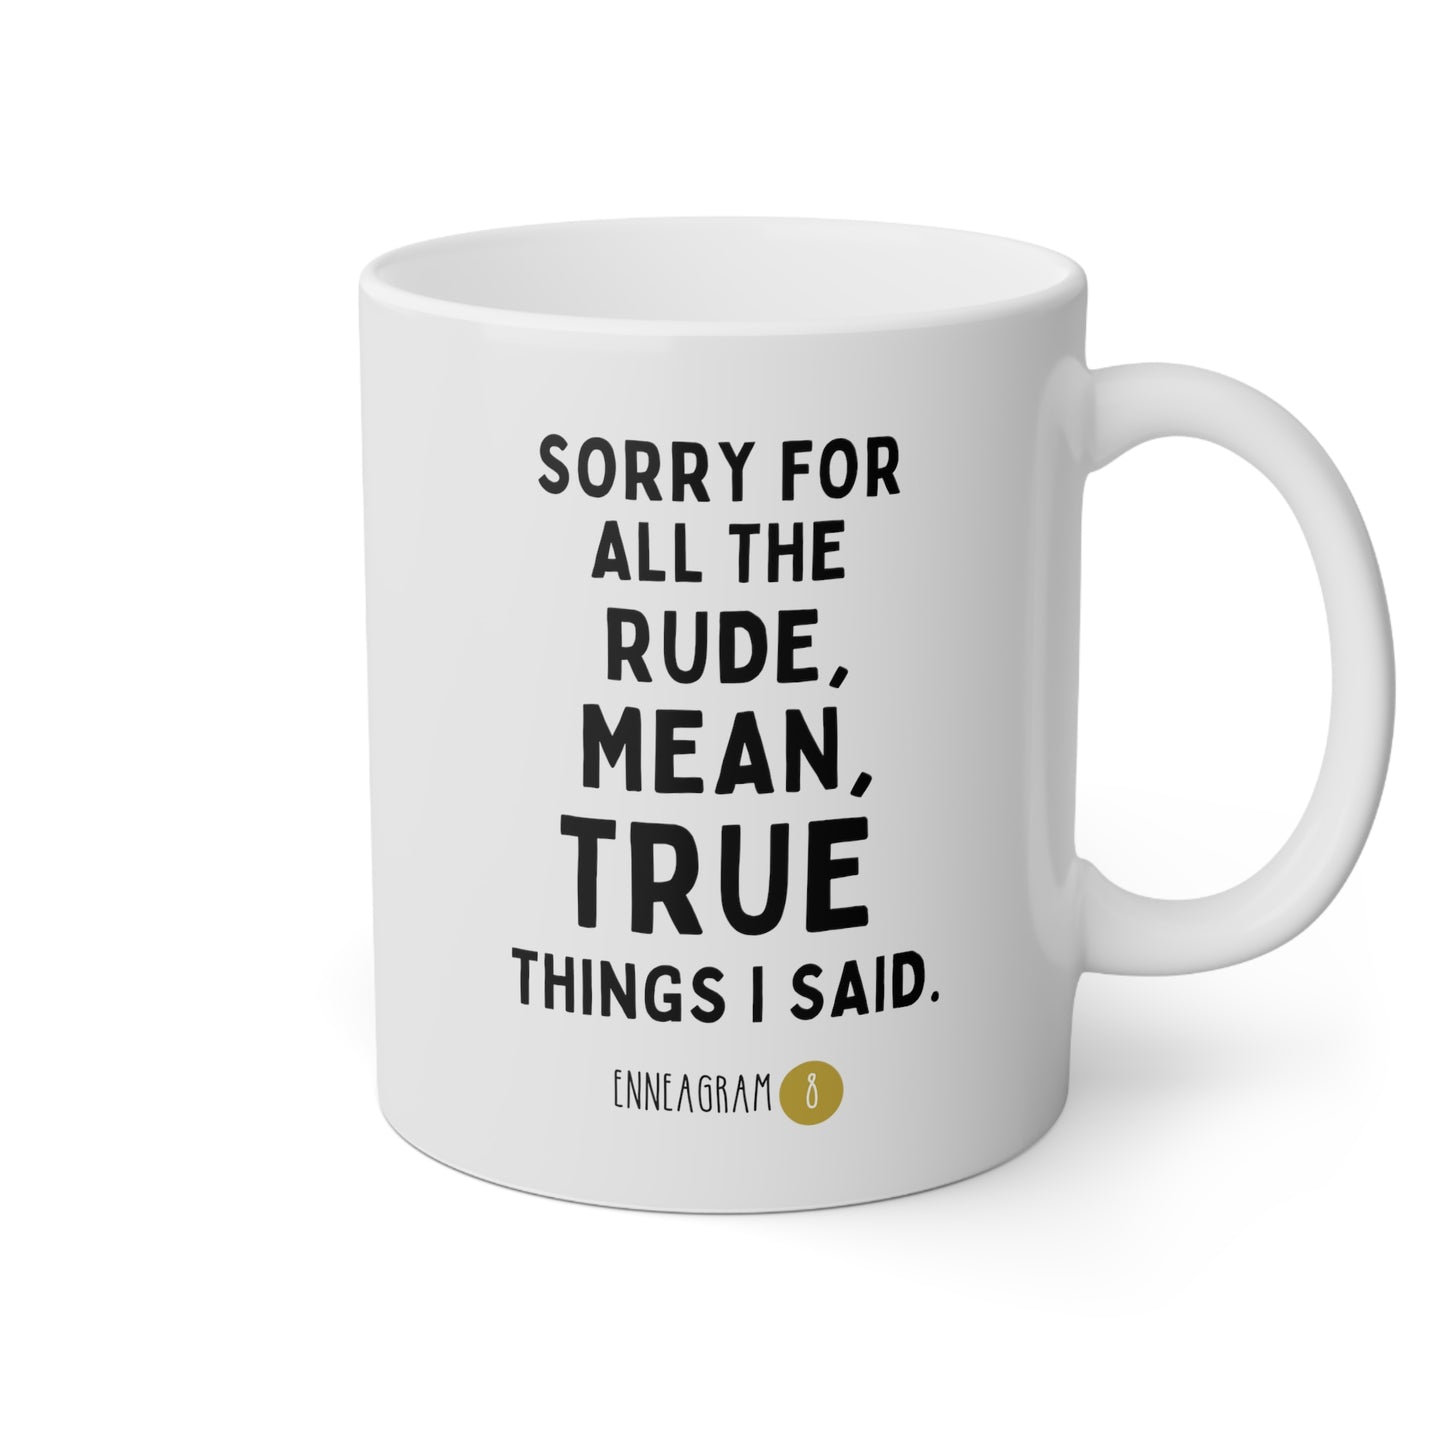 Sorry For All The Rude Mean True Things I Said Enneagram 8 11oz white funny large coffee mug gift for friend mbti personality test waveywares wavey wares wavywares wavy wares